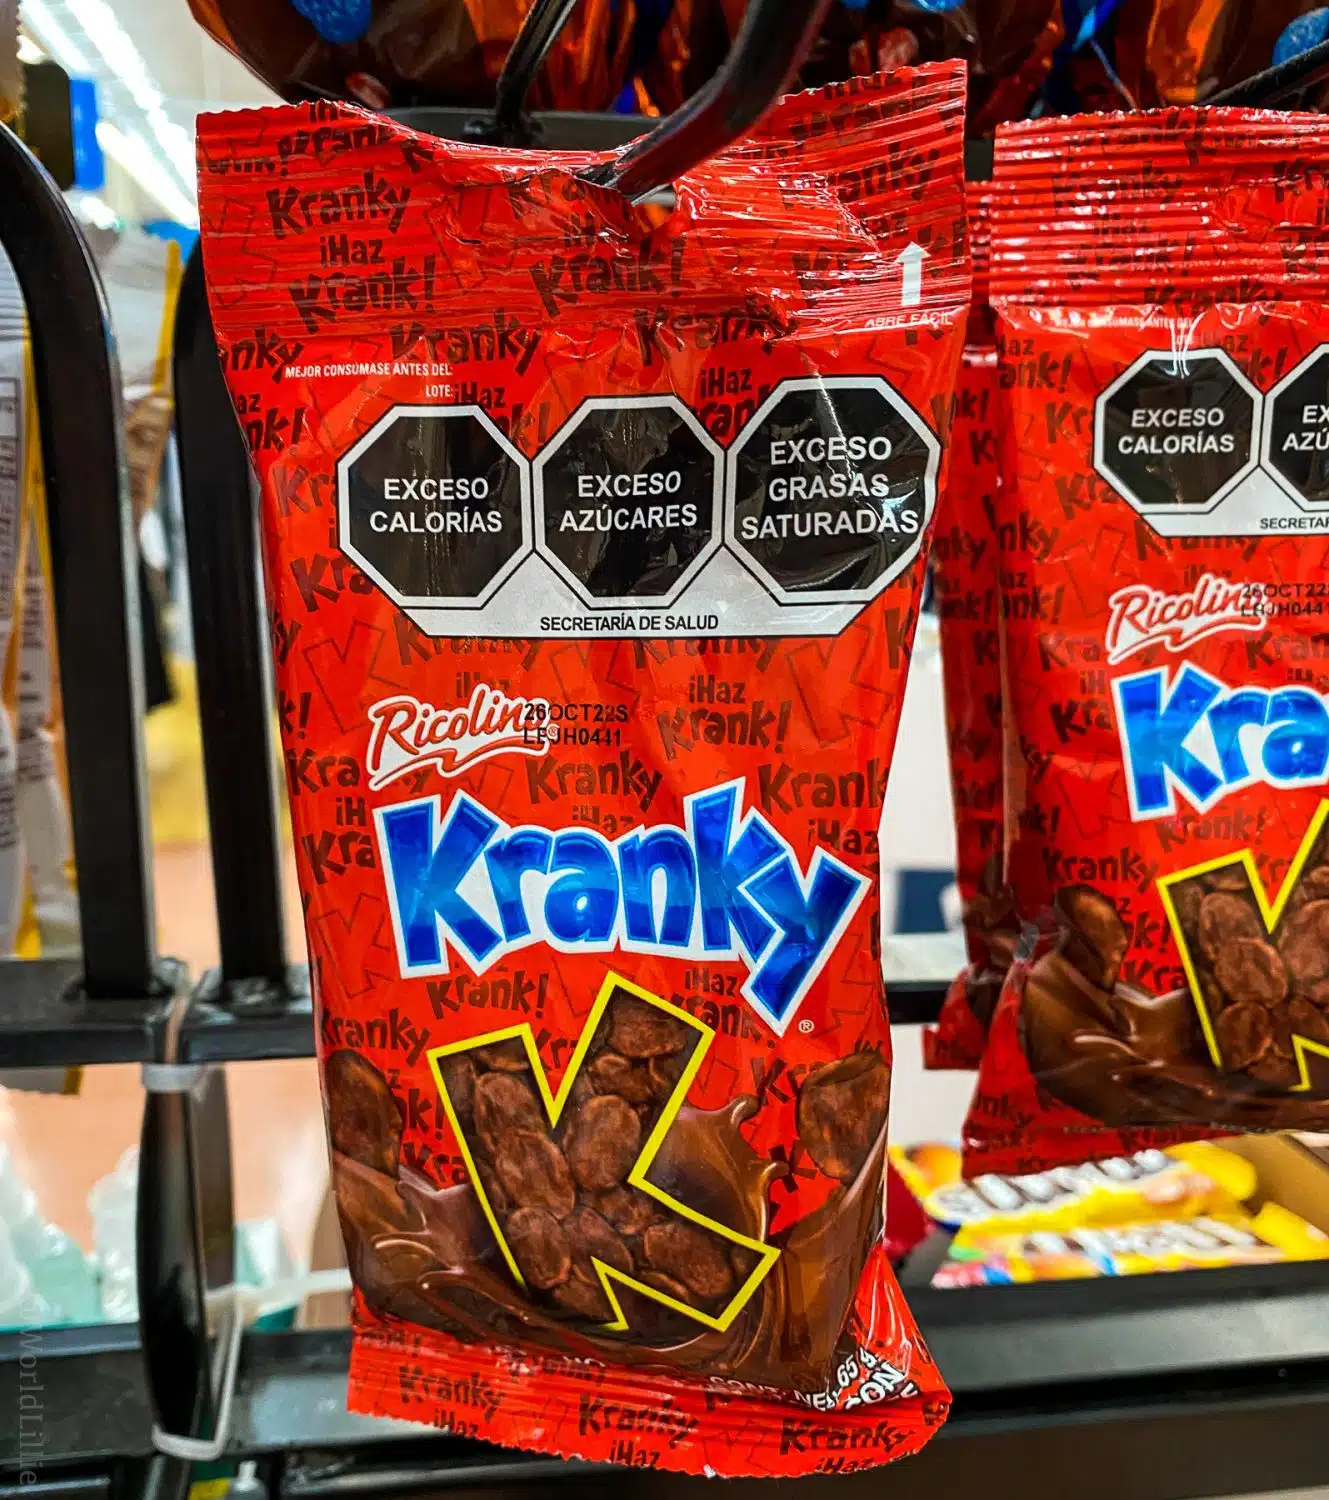 Kranky candy in Mexico made me smile.